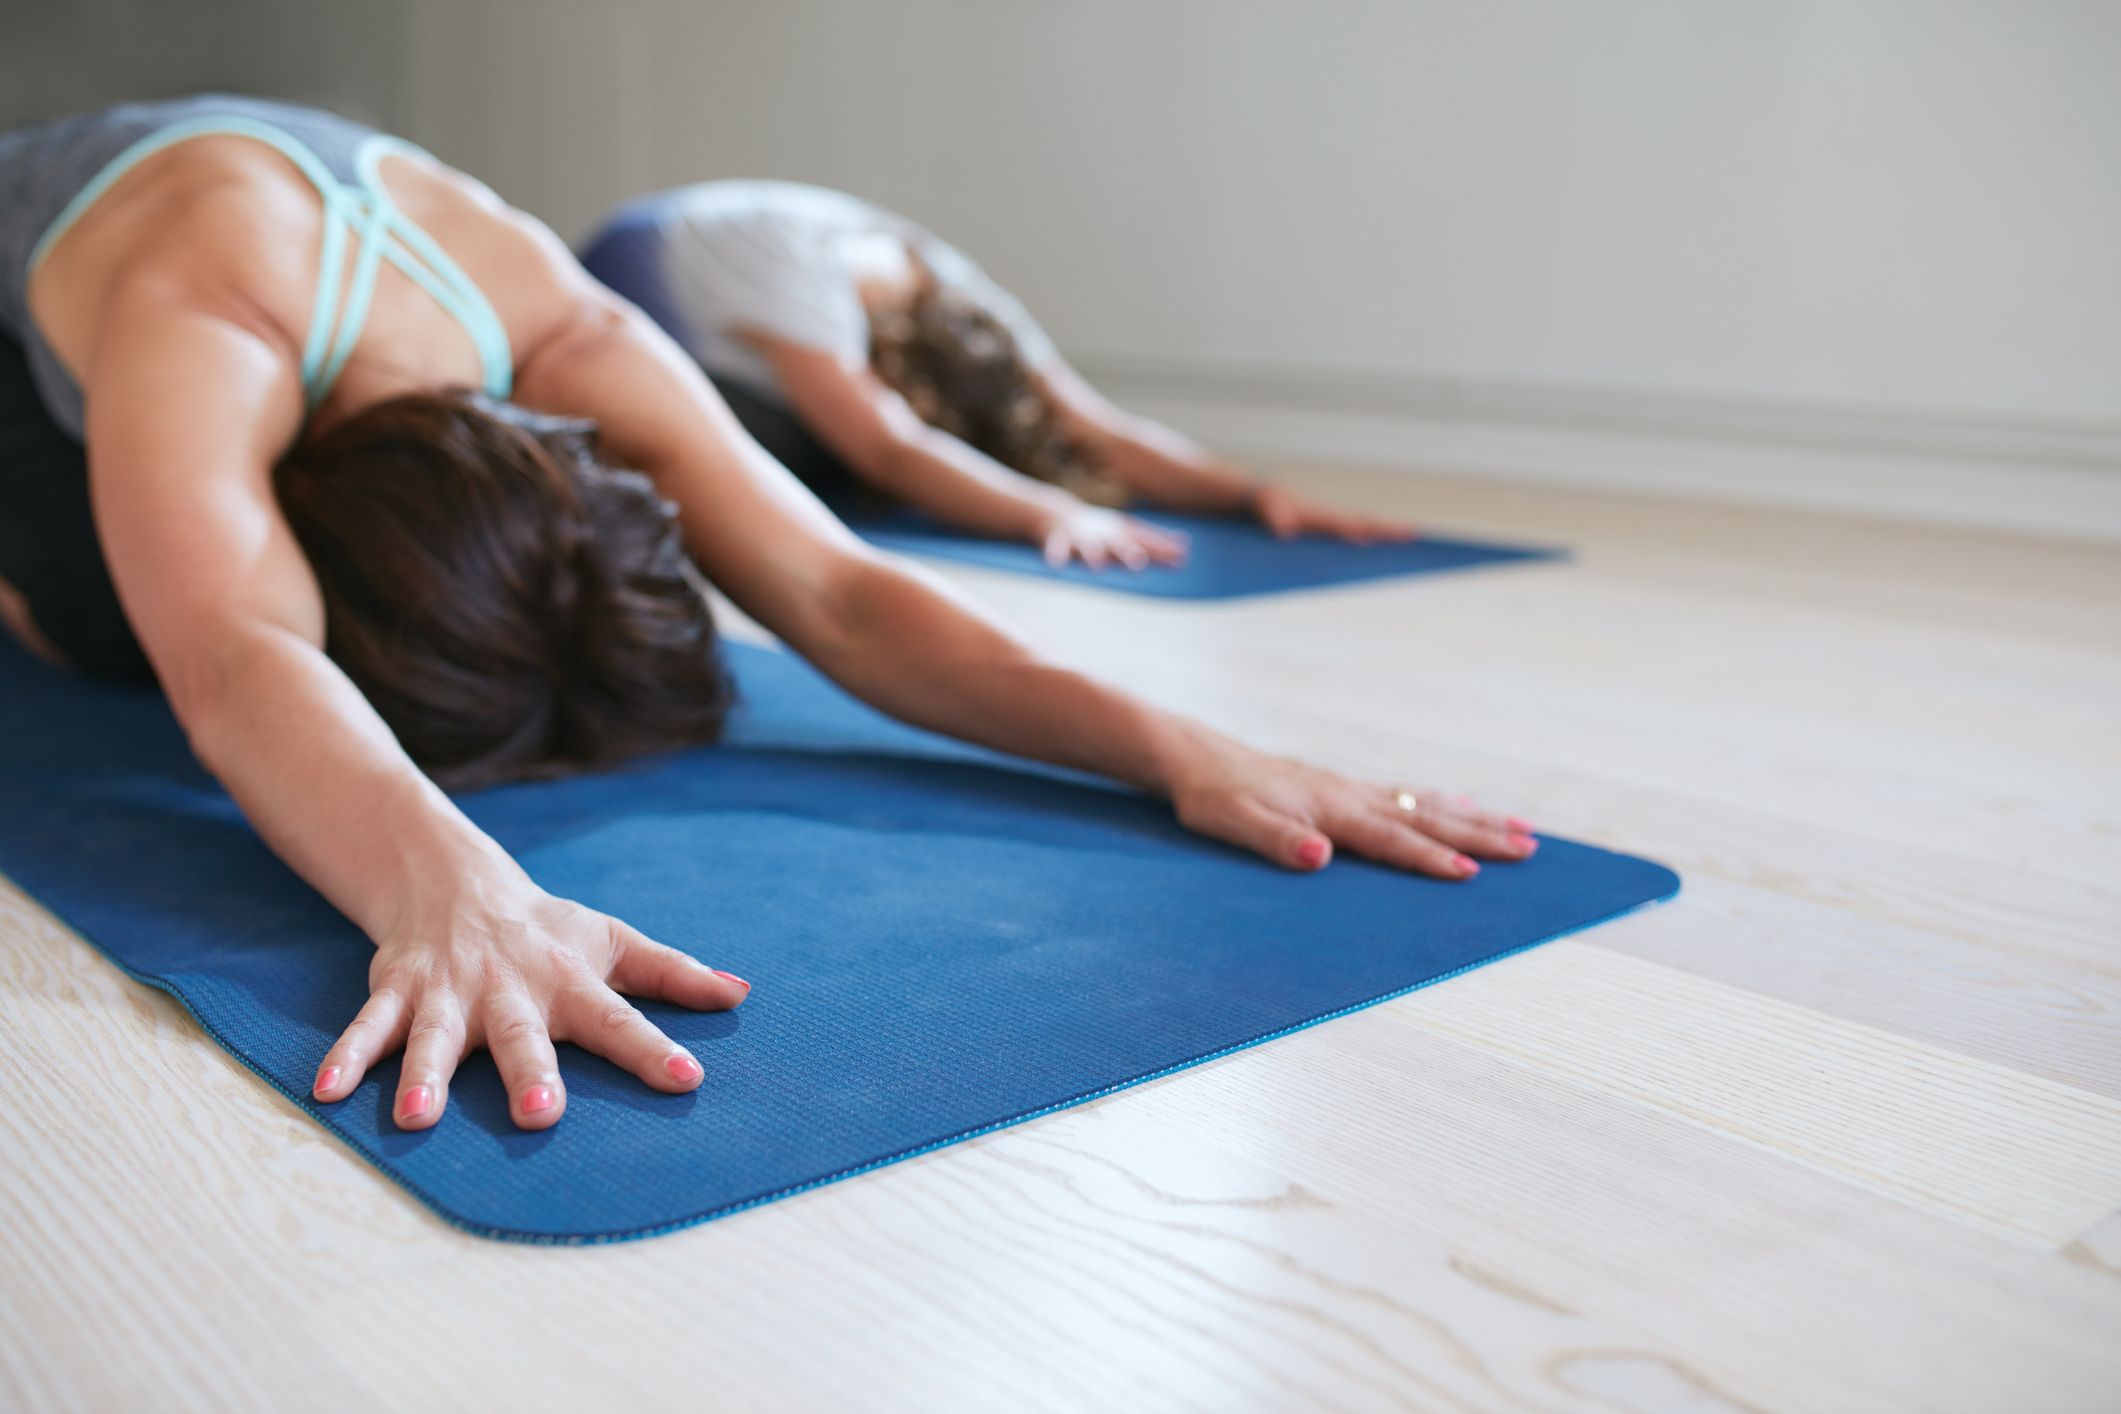 Purchase a yoga mat for your yoga sessions